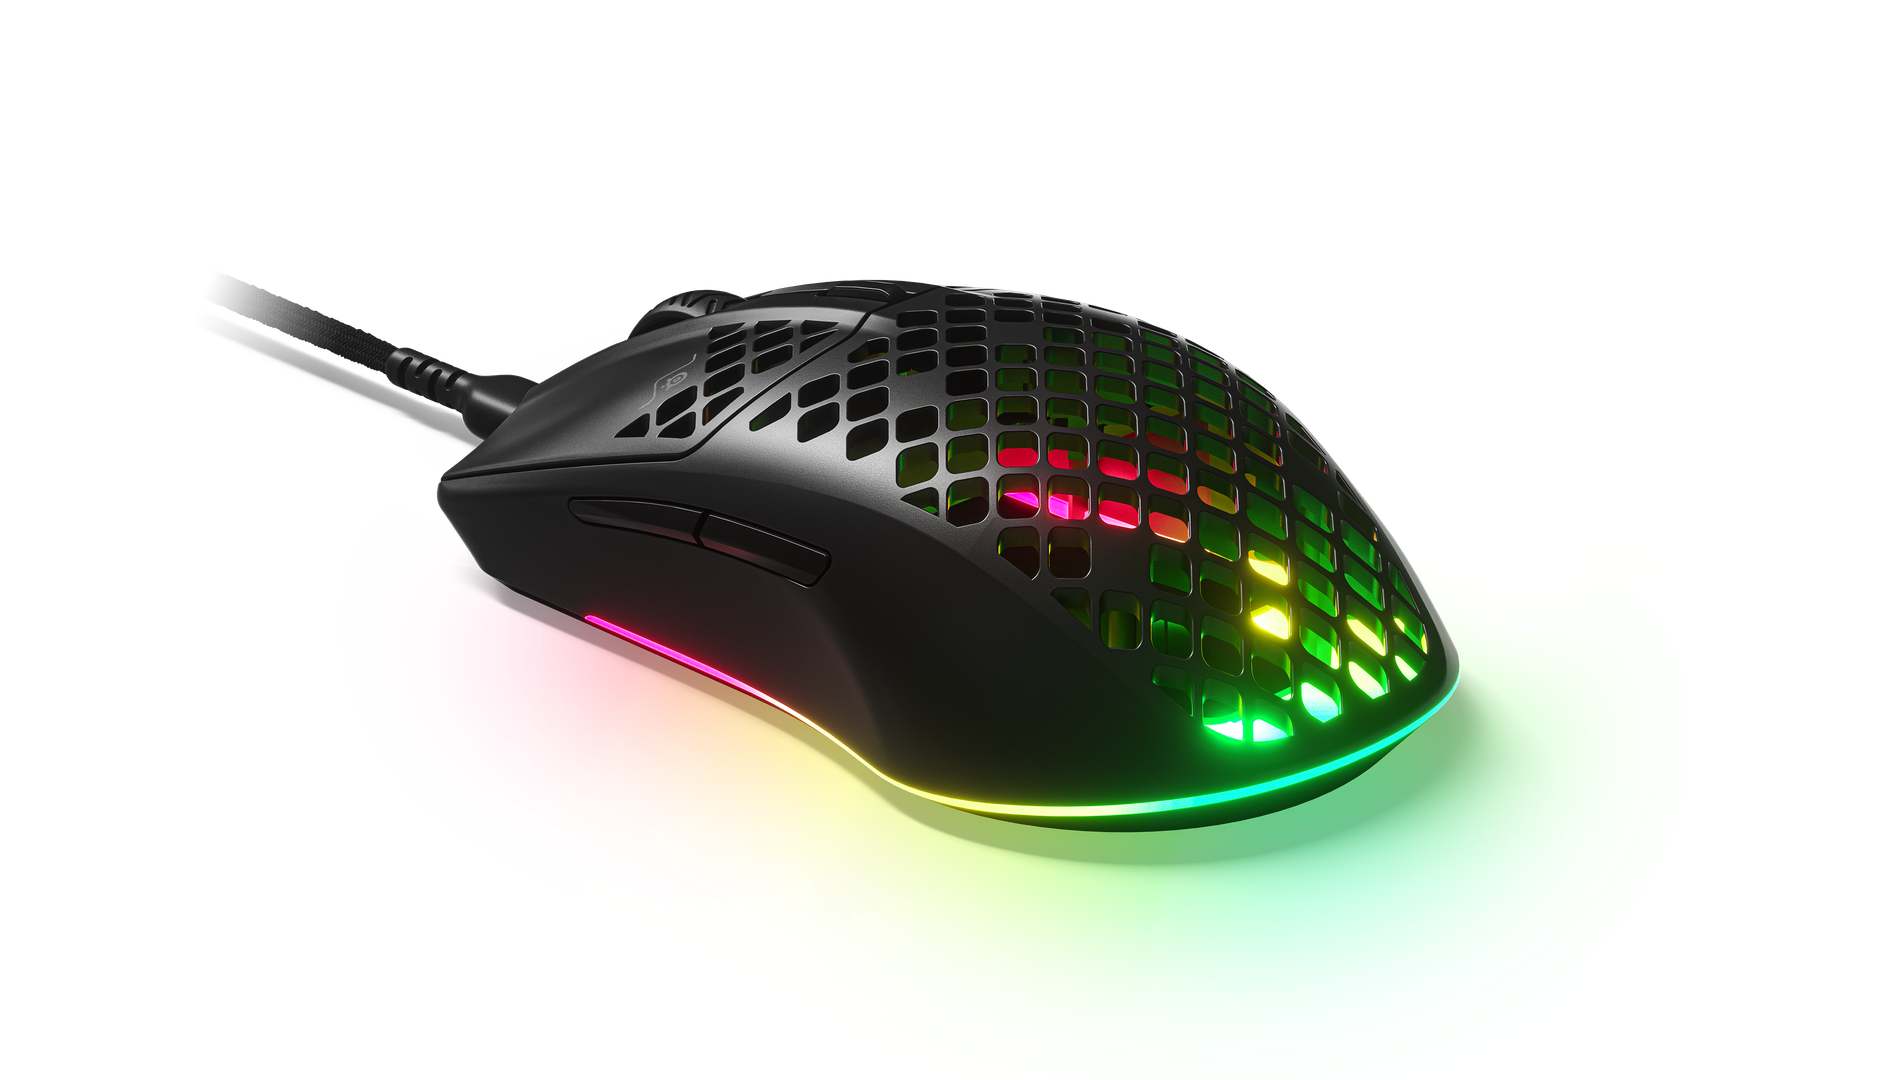 Steelseries - Aerox 3 - Gaming Mouse